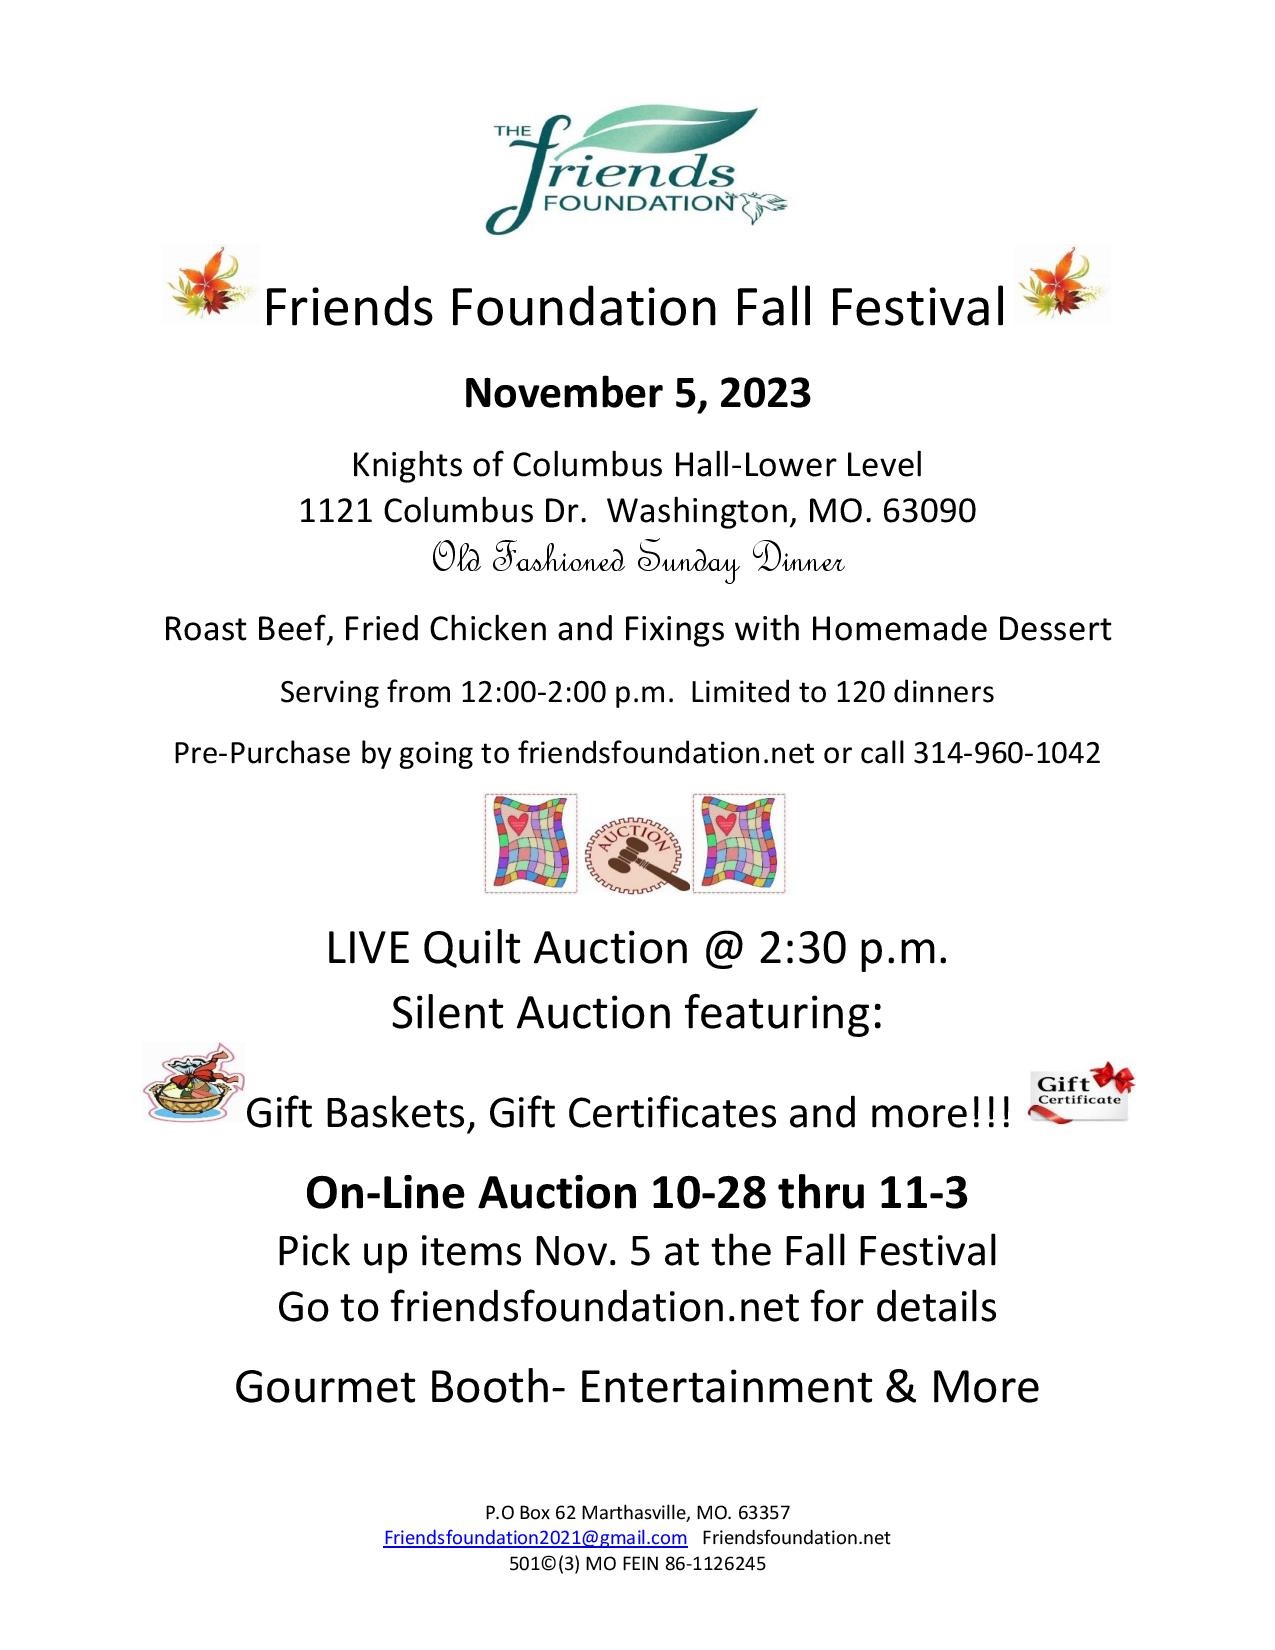 Fall Festival and Auction